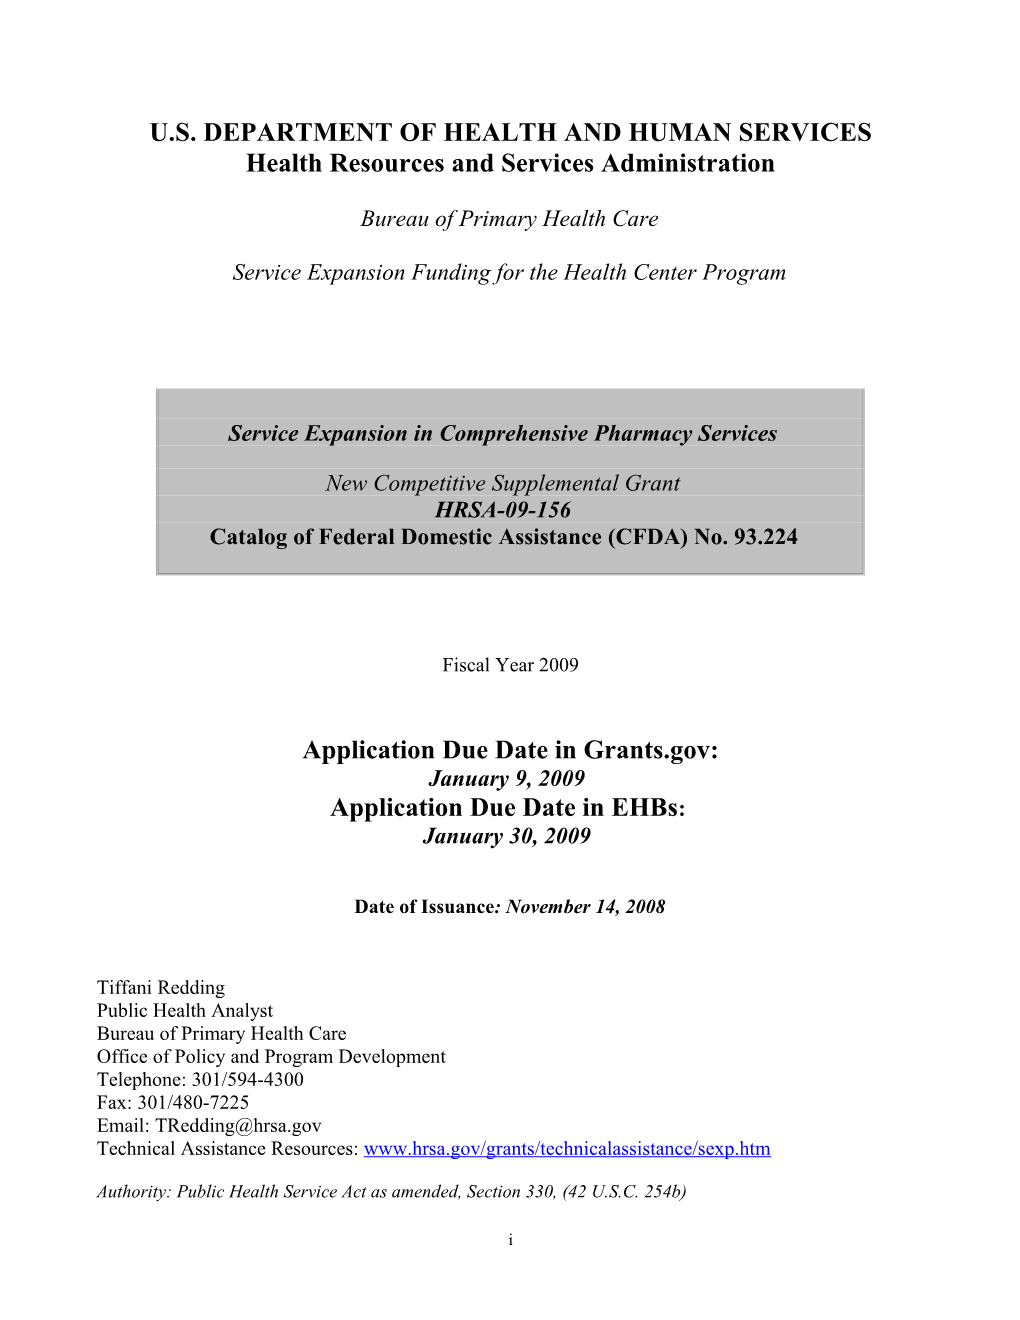 U.S. Department of Health and Human Services s3